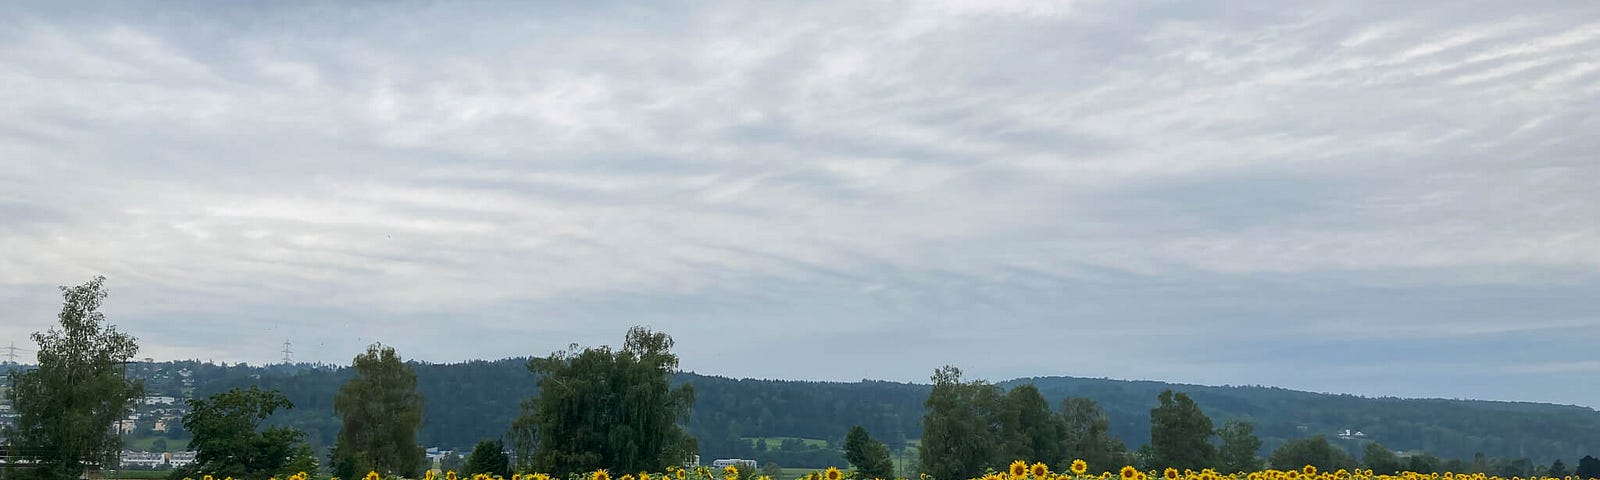 Path stretching in opposite directions in front of field of sunflowers